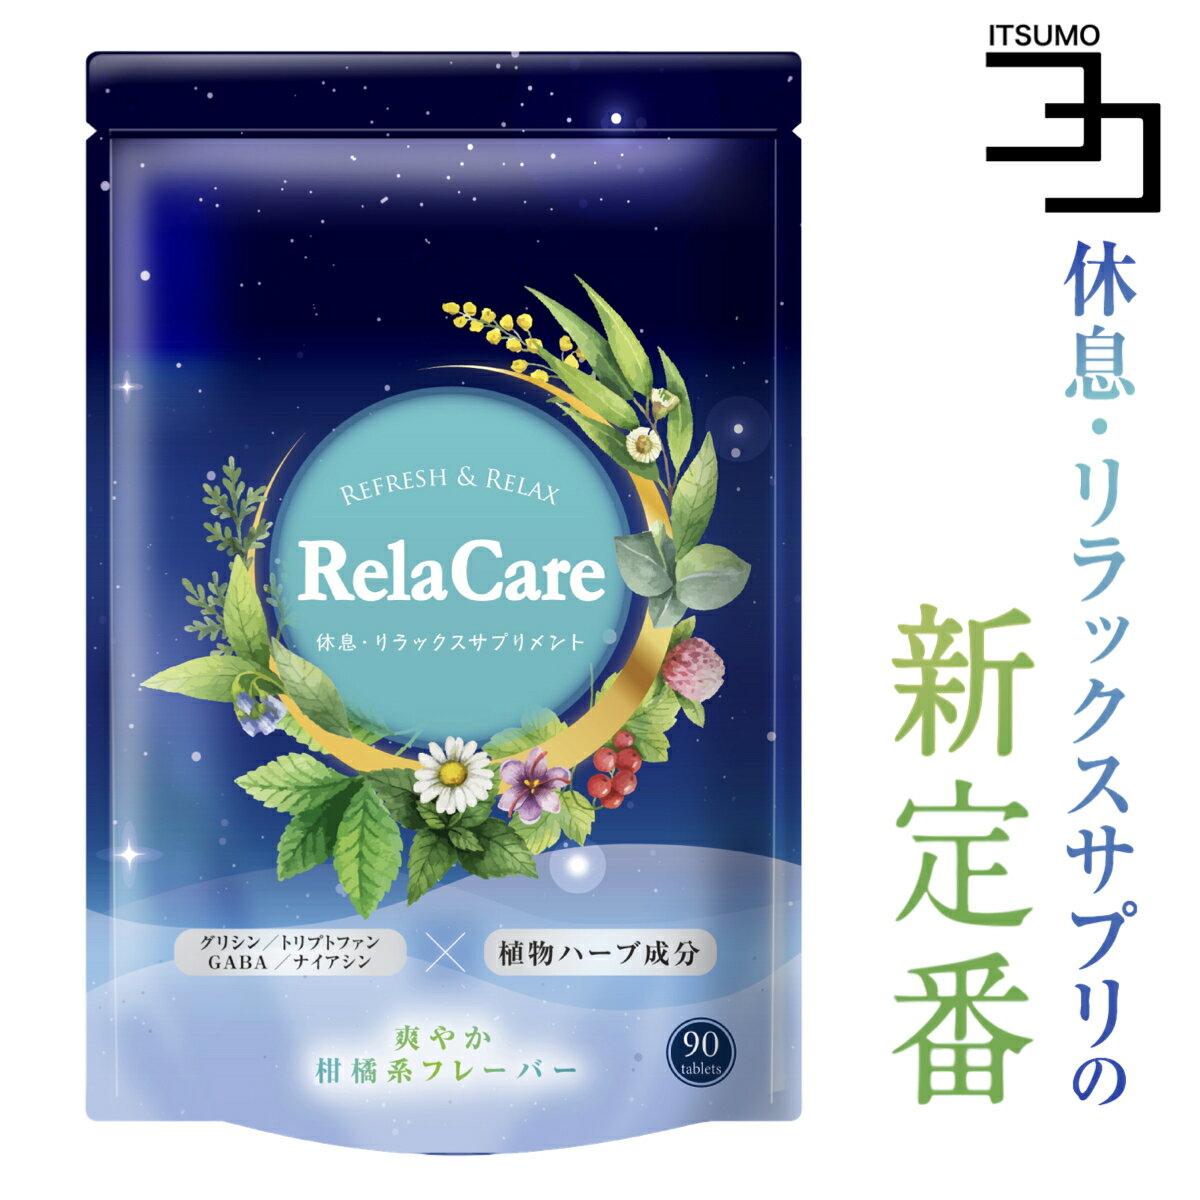 Growth canvas『RelaCare』